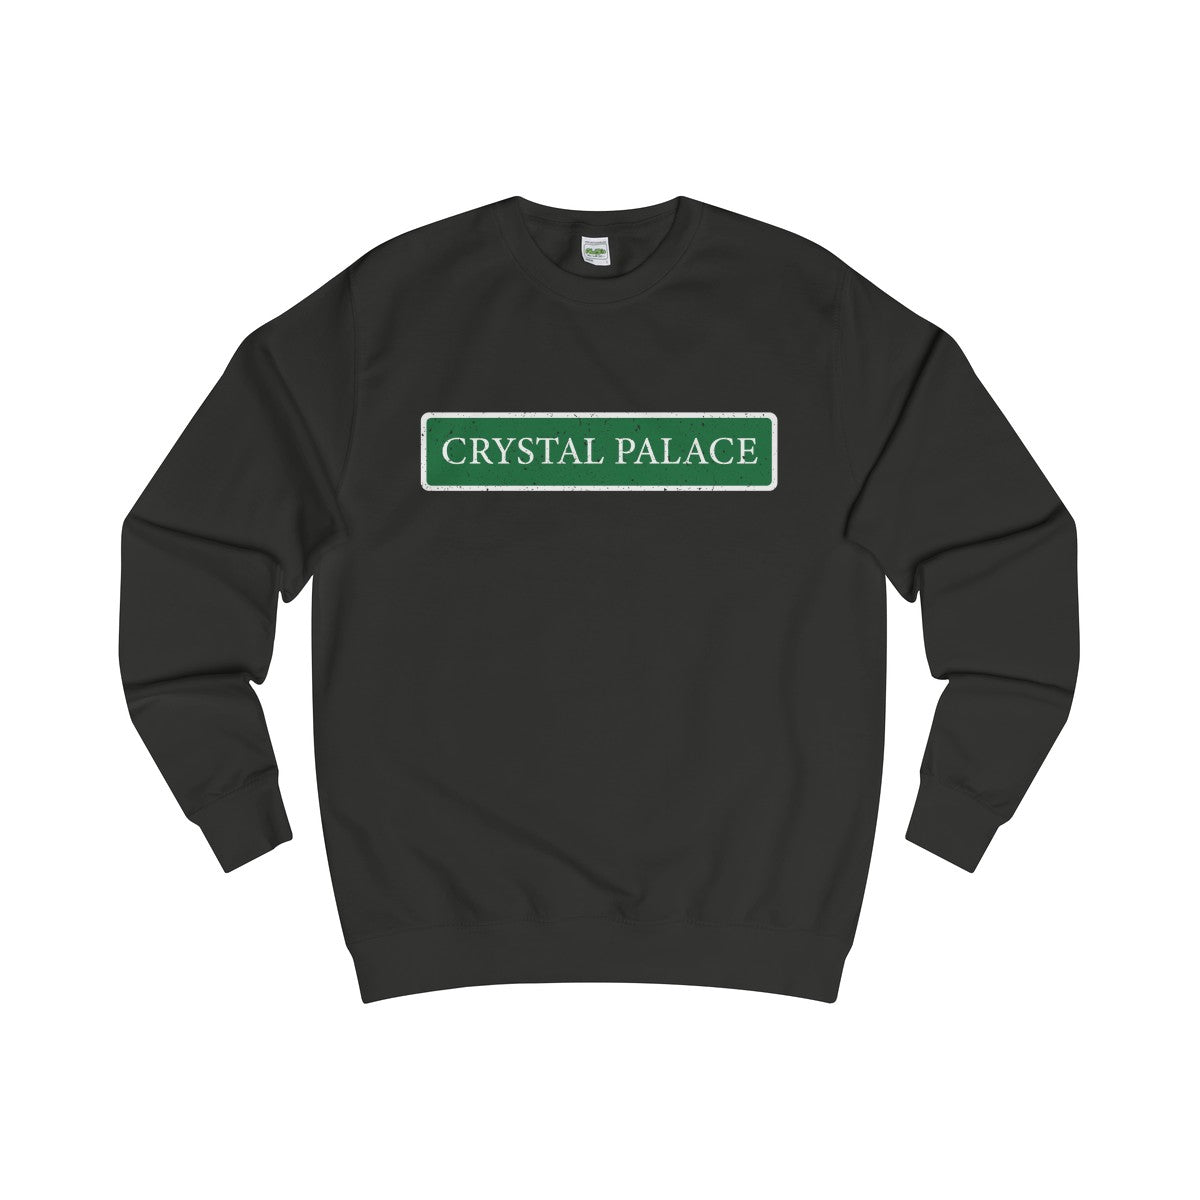 Crystal Palace Road Sign Sweater